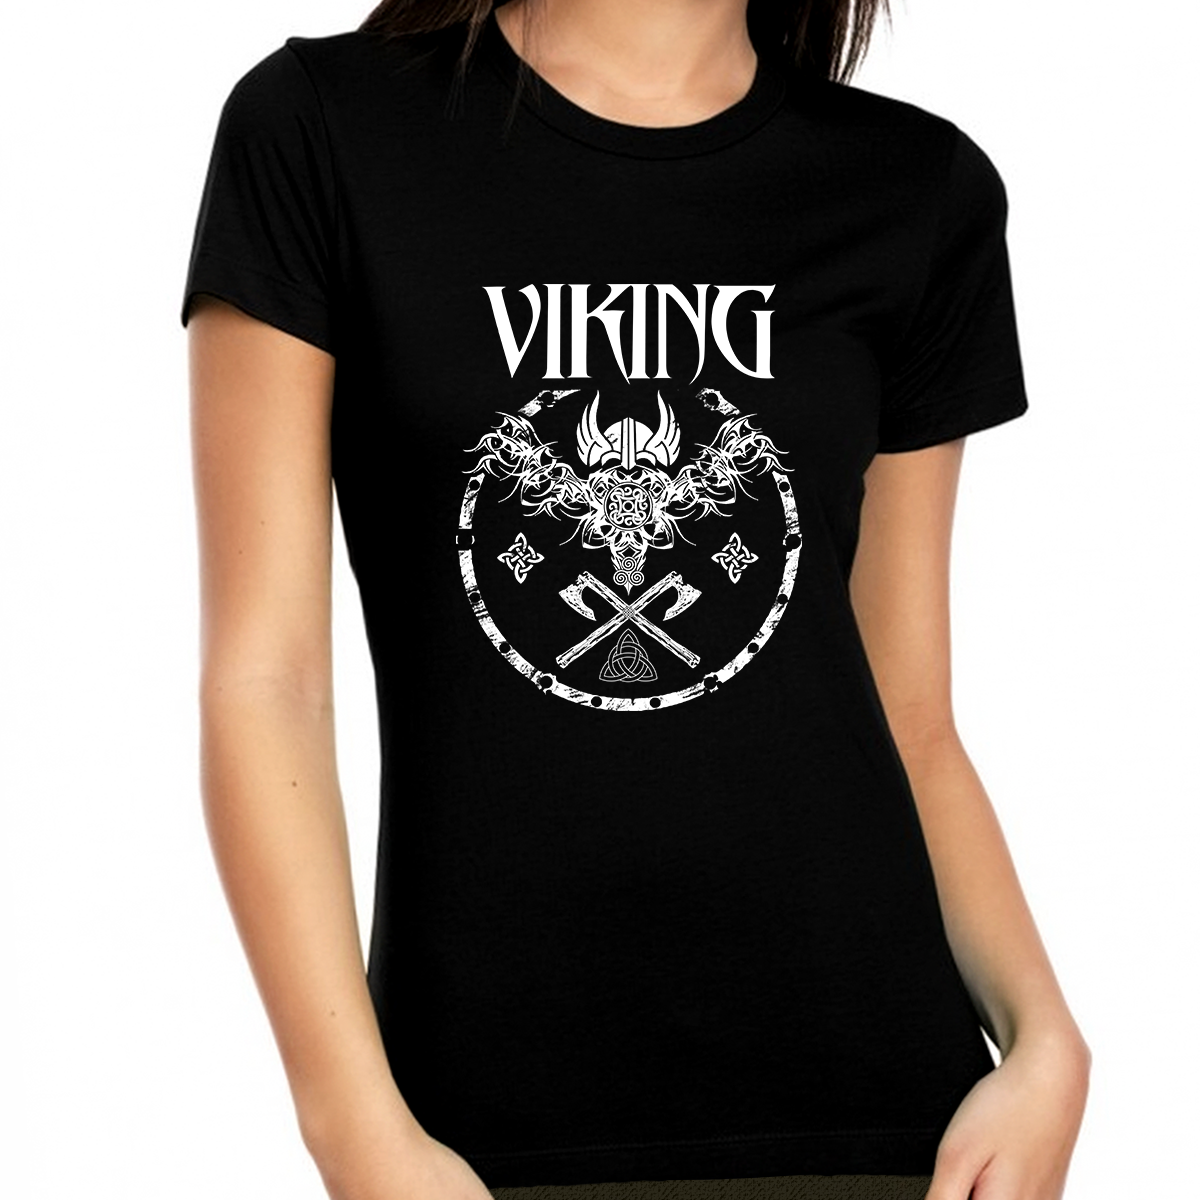 Viking Shirts for Women - Norse Mythology Odin Valkyrie Valhalla Vikings Raven Thor Nordic Graphic Tees for Women - Fire Fit Designs